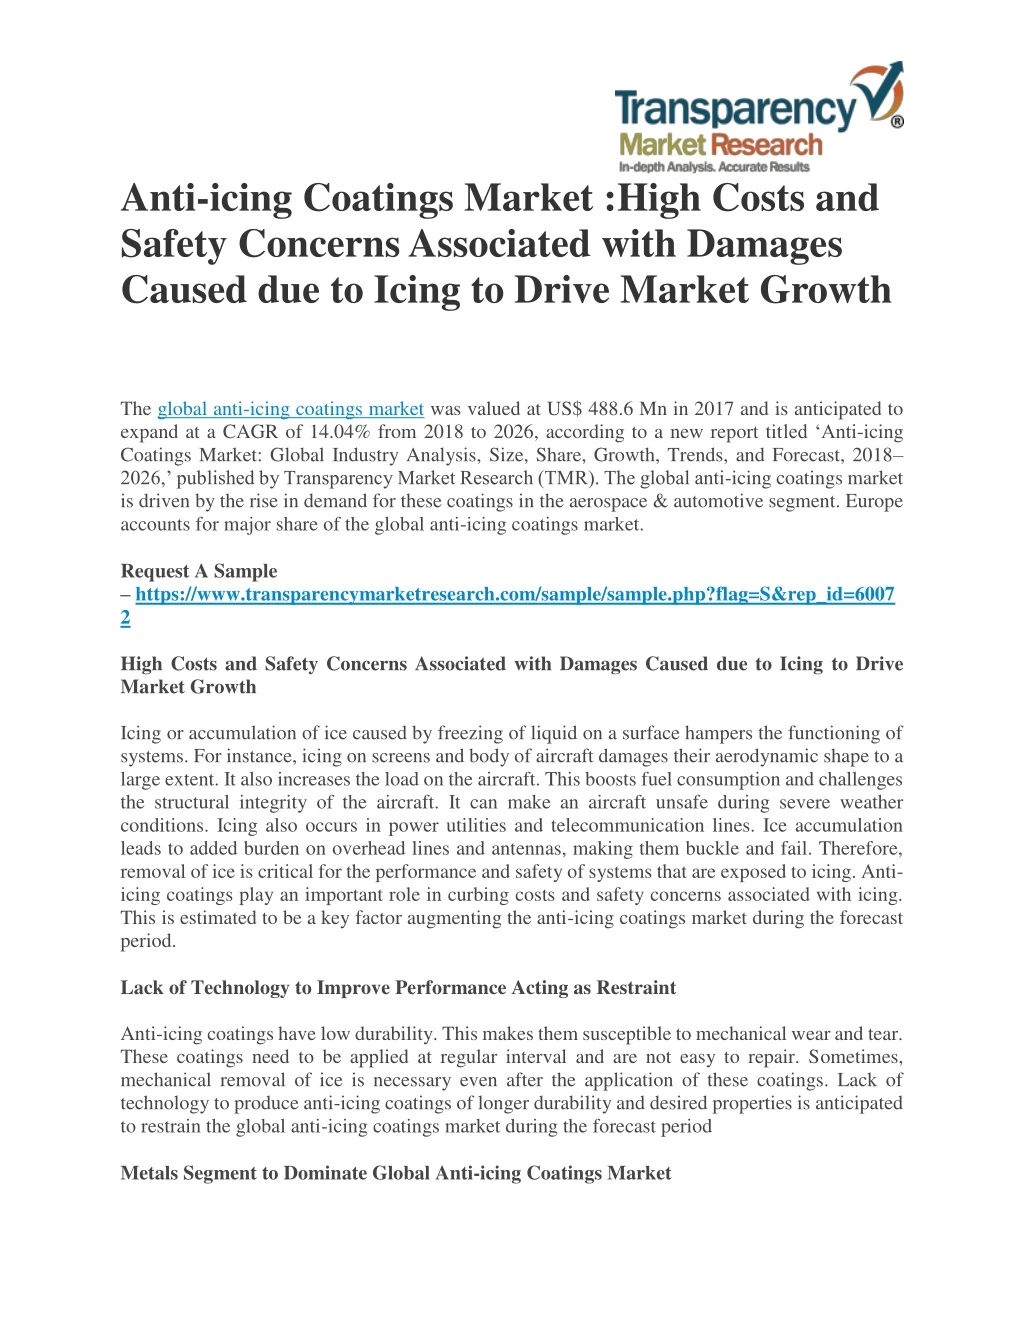 anti icing coatings market high costs and safety